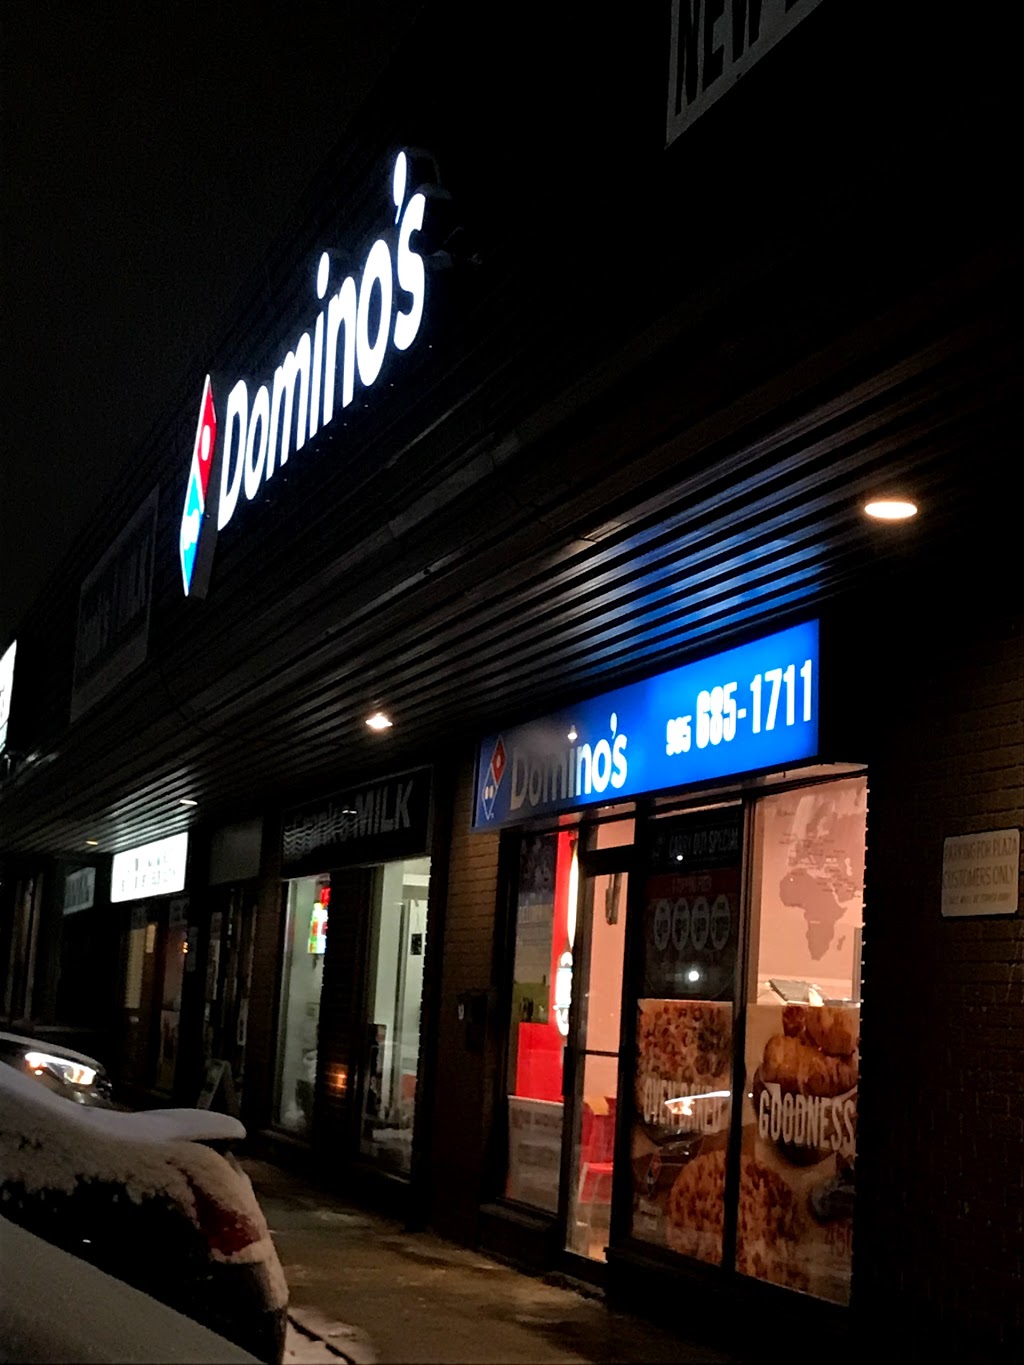 Dominos | meal delivery | 170 Hartzel Rd Unit #3, St. Catharines, ON L2P 1P1, Canada | 9056851711 OR +1 905-685-1711